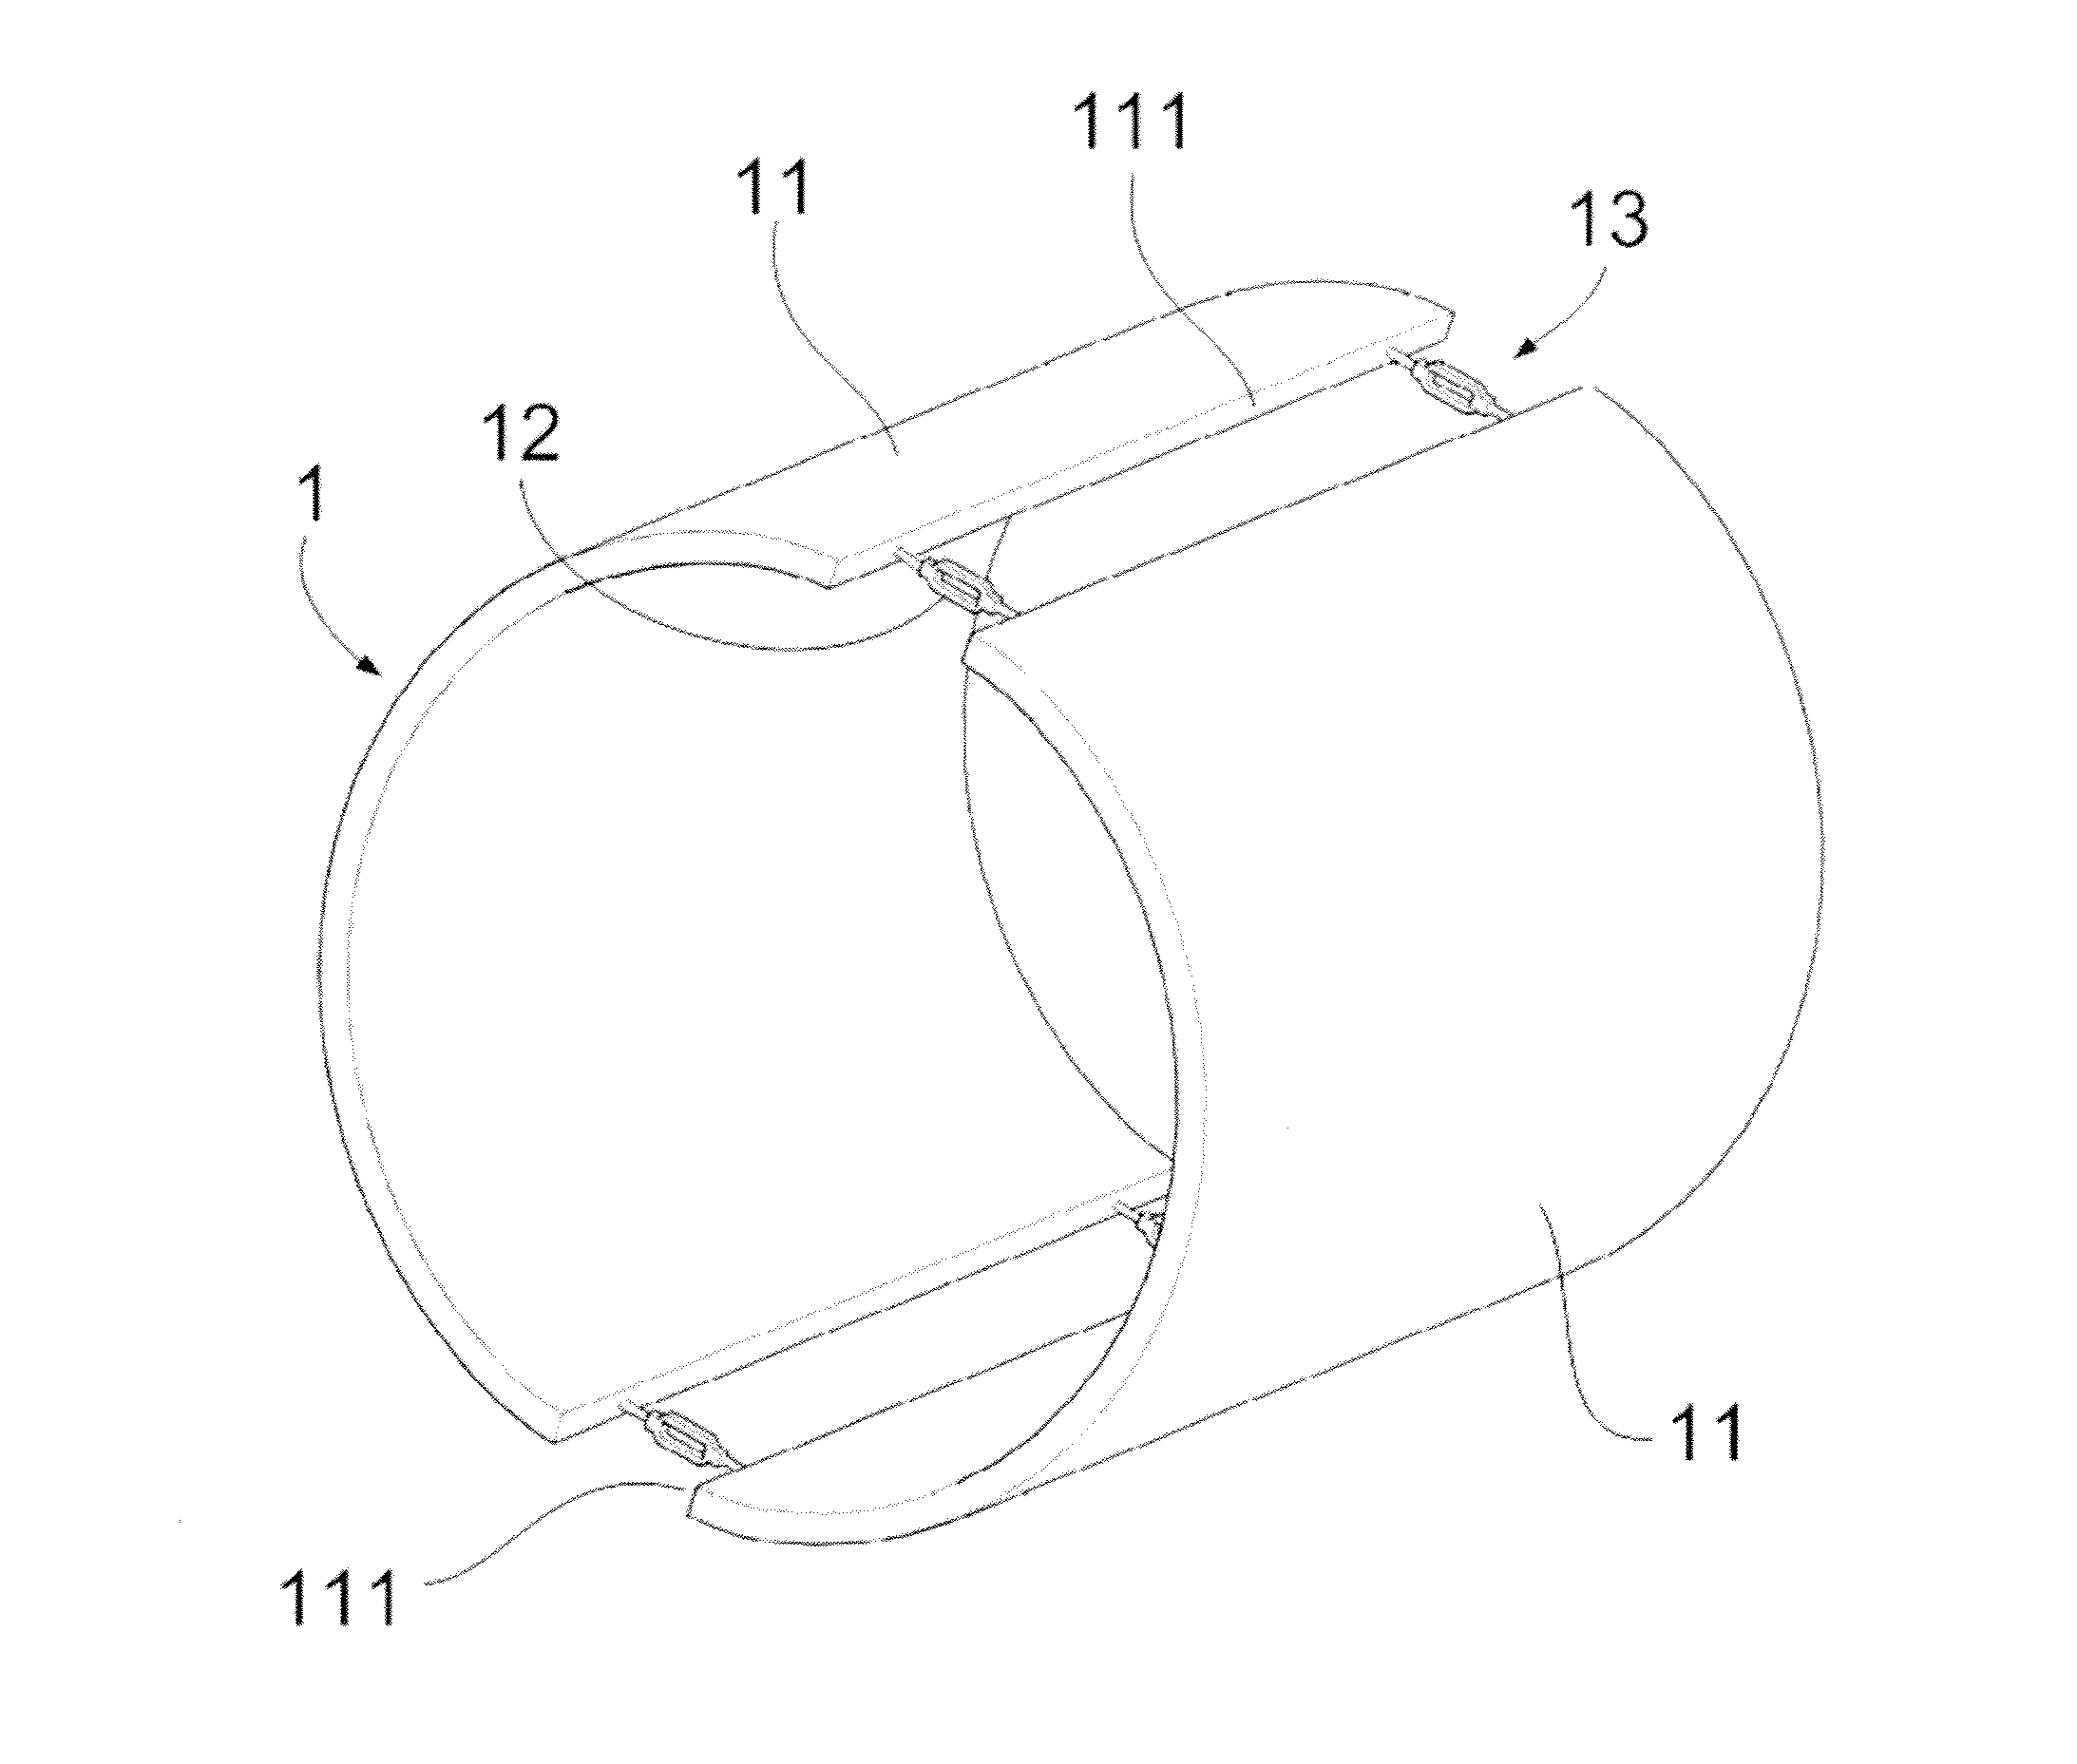 Anti-Ovalization Tool for Introduction Into a Wind Turbine Blade Root and Method of Reducing Ovalization of a Wind Turbine Blade Root